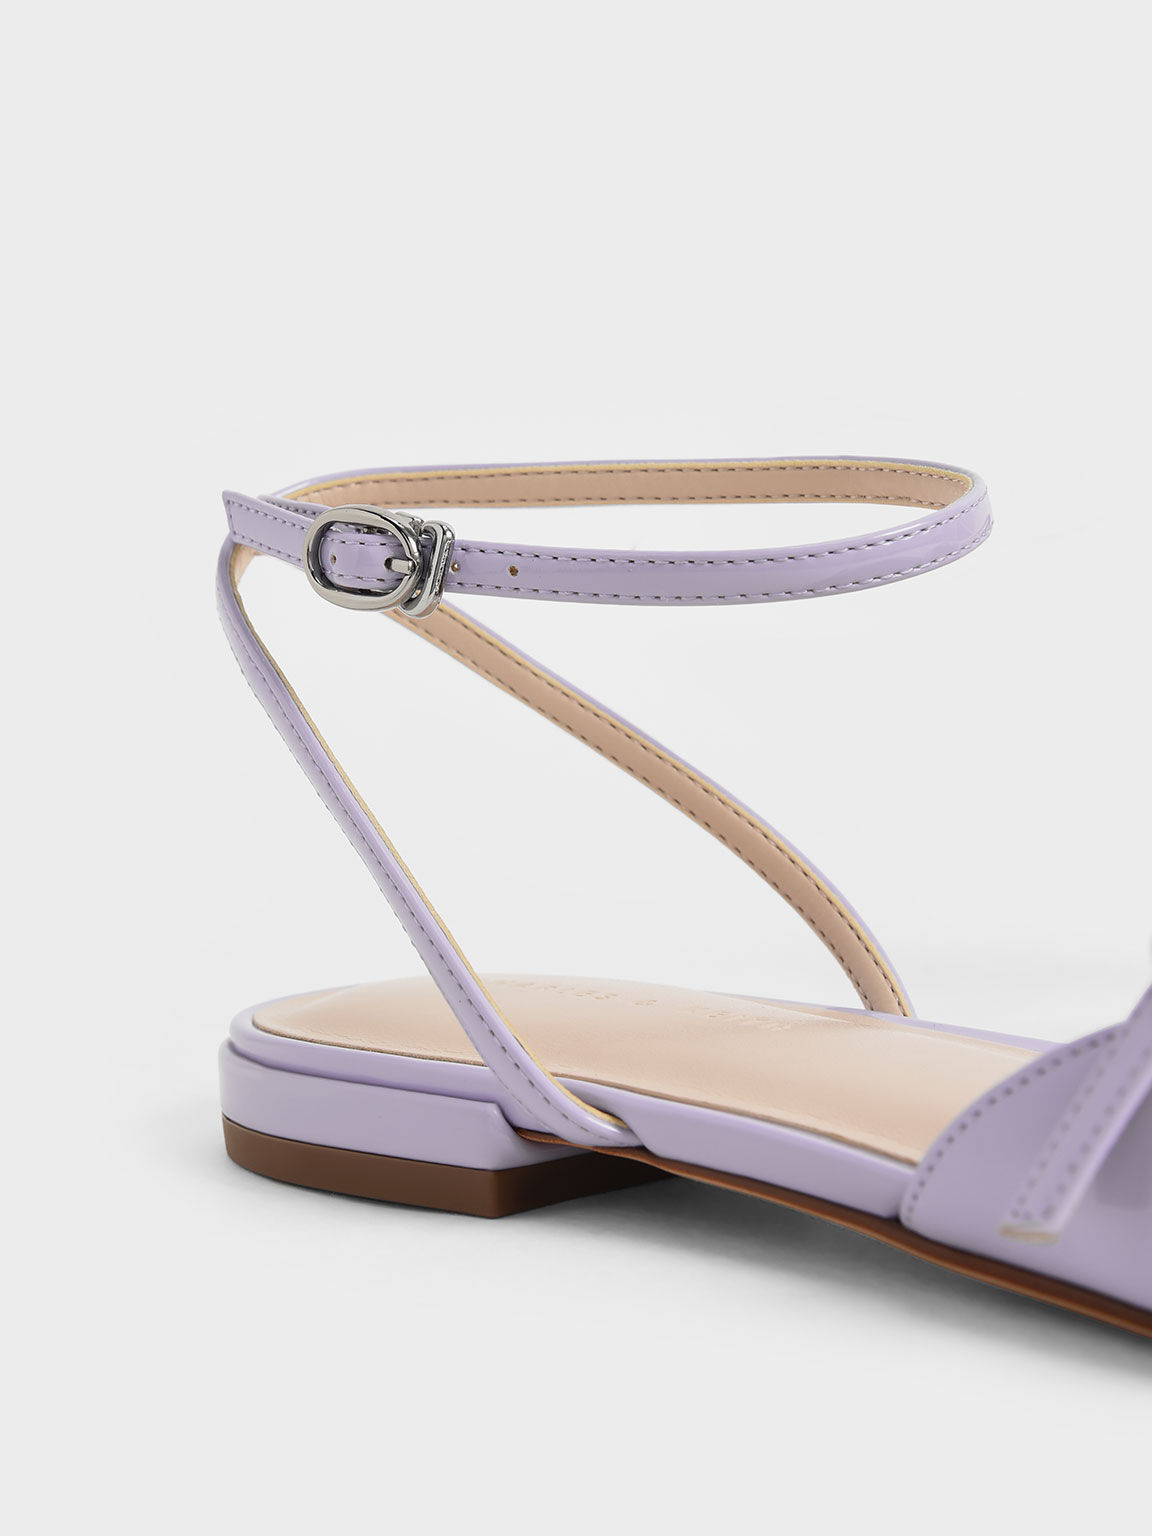 Edith Patent Ankle-Strap Ballerina Pumps, Lilac, hi-res